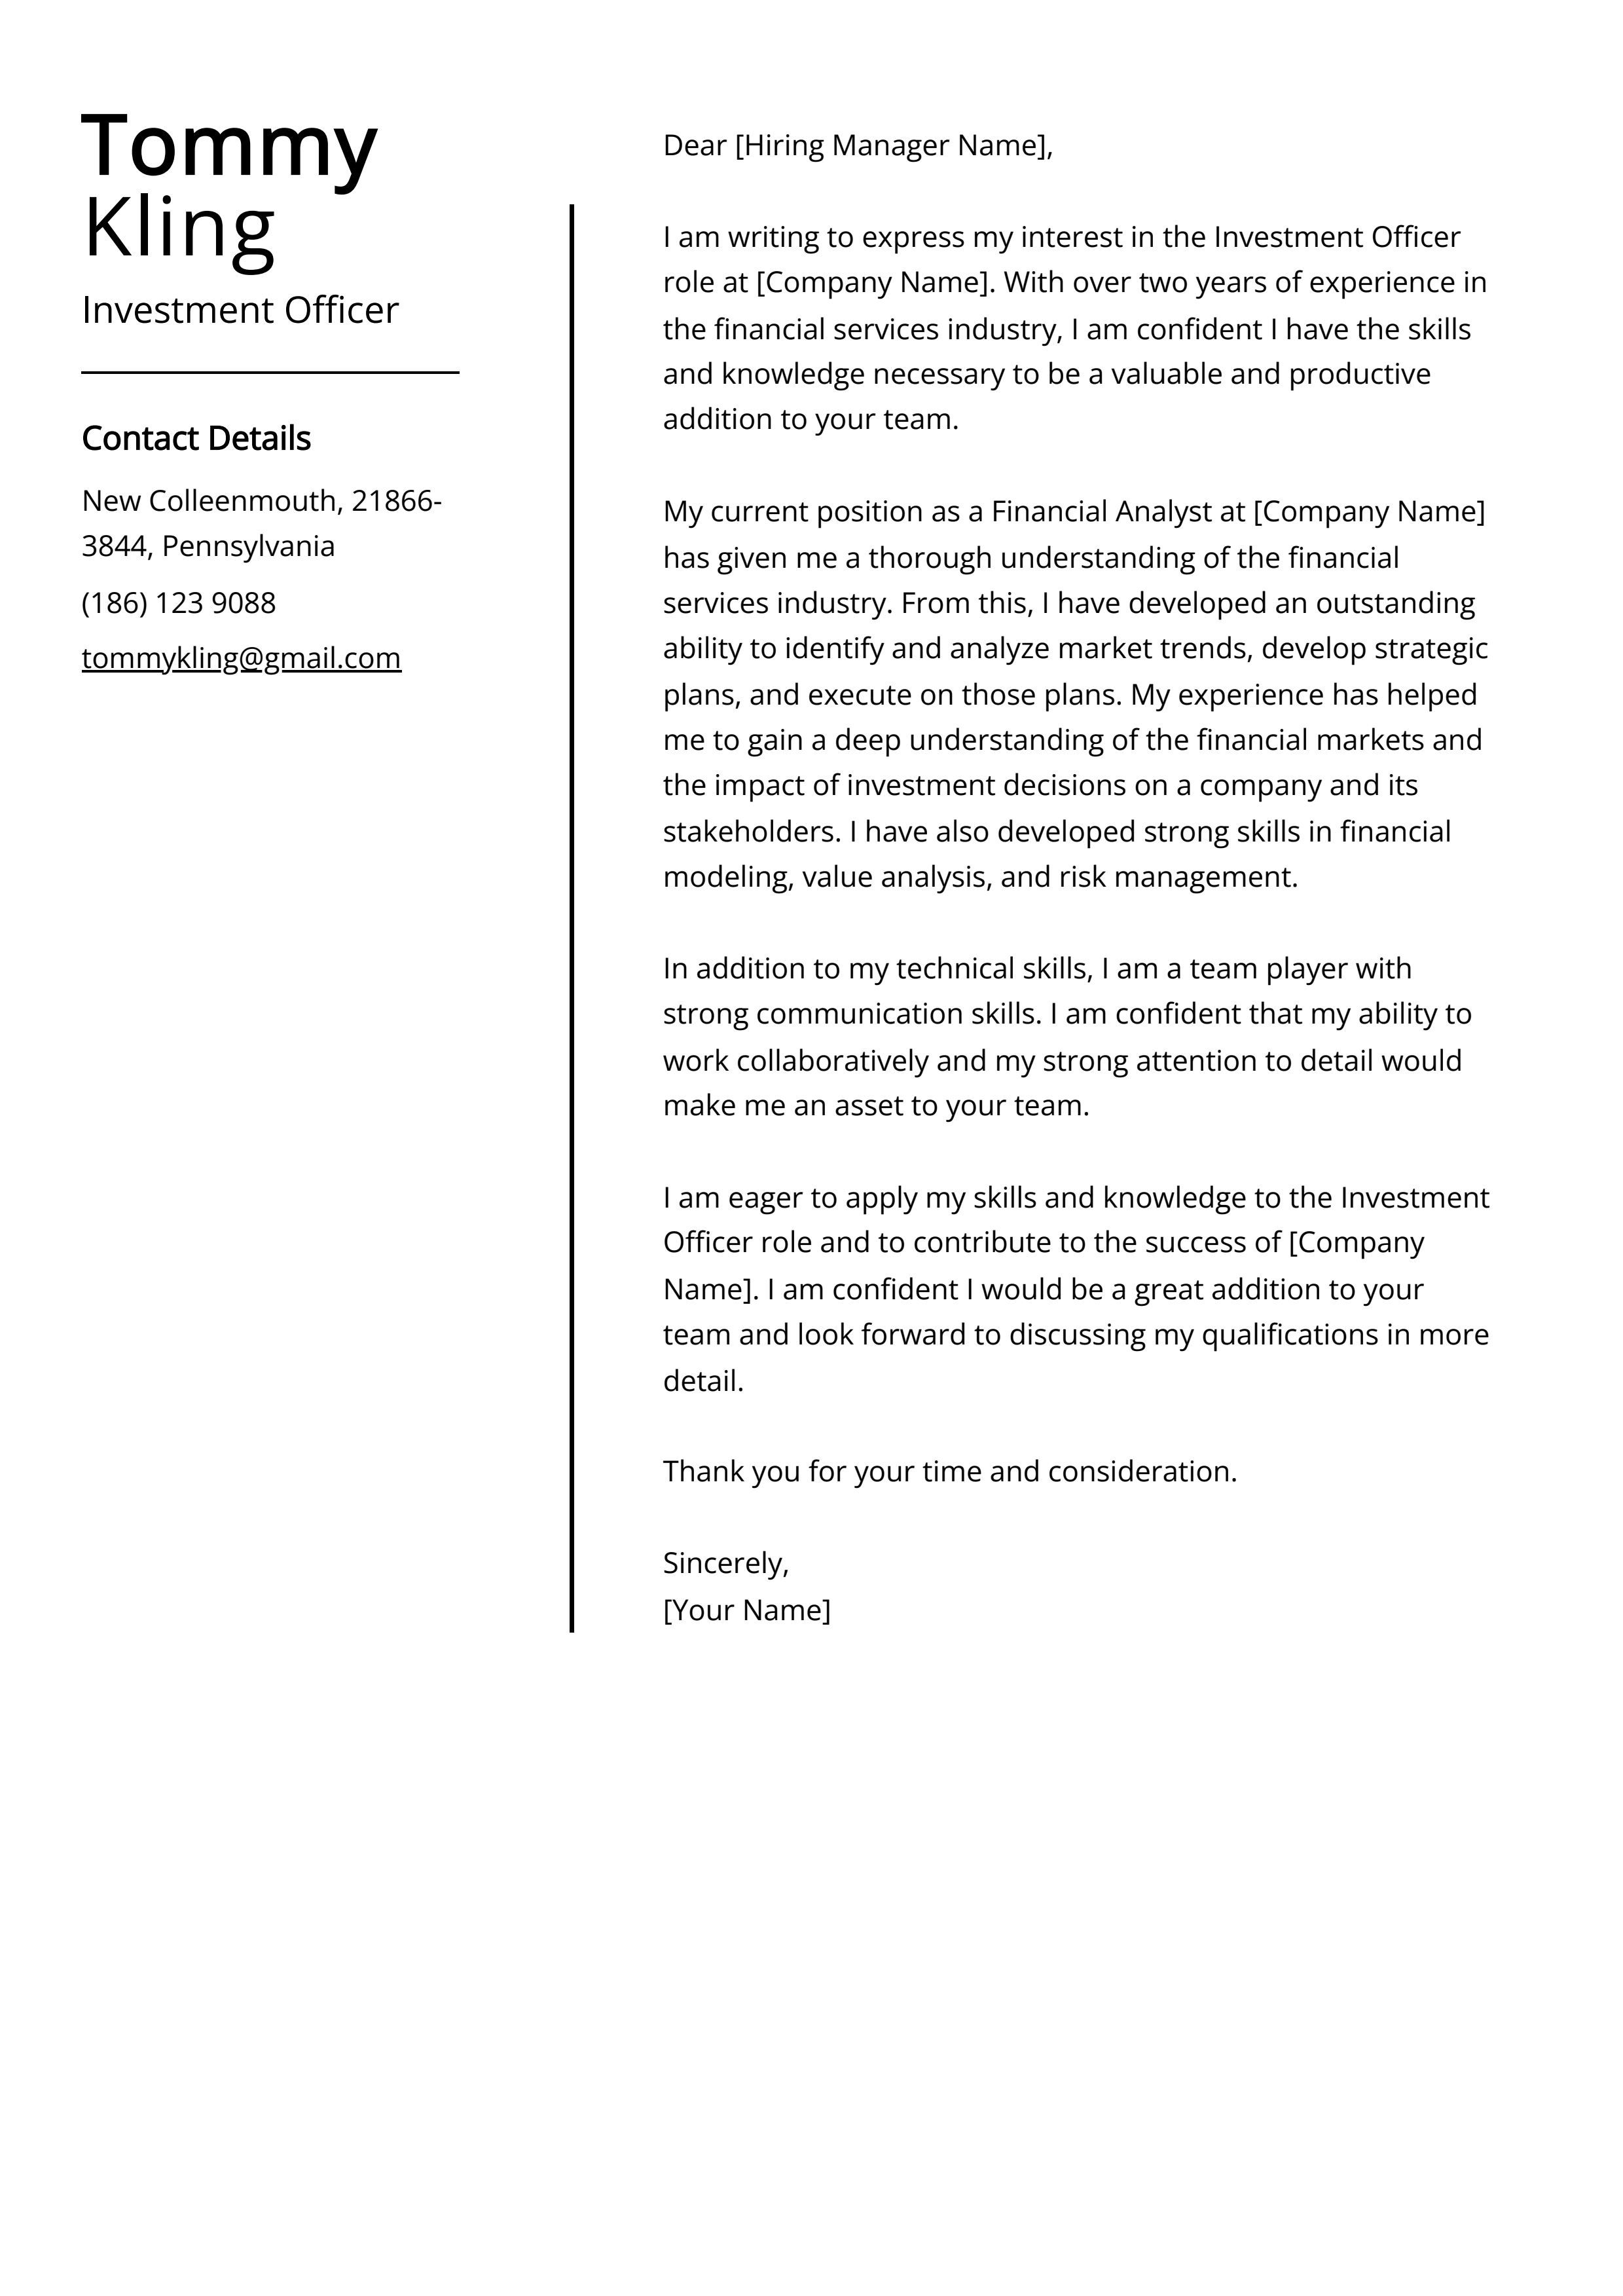 Investment Officer Cover Letter Example